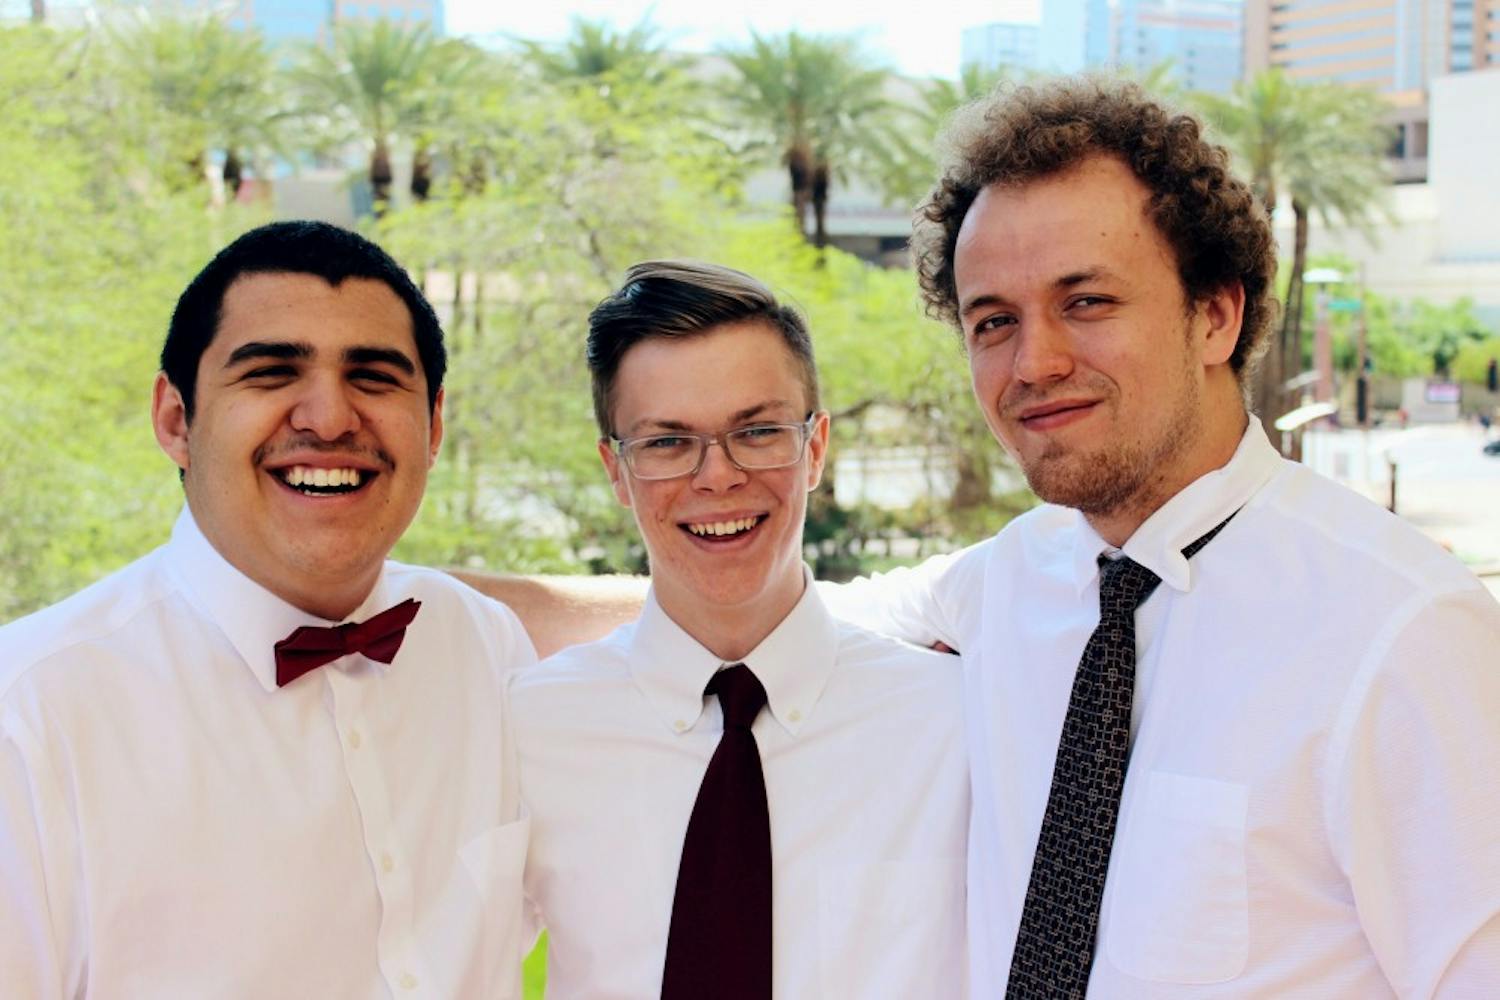 Ernesto Hernandez (Vice President of Services), left, Jackson Dangremond (President), center, and Jimmy Arwood (Vice President of Policy), right, pose for a portrait.&nbsp;